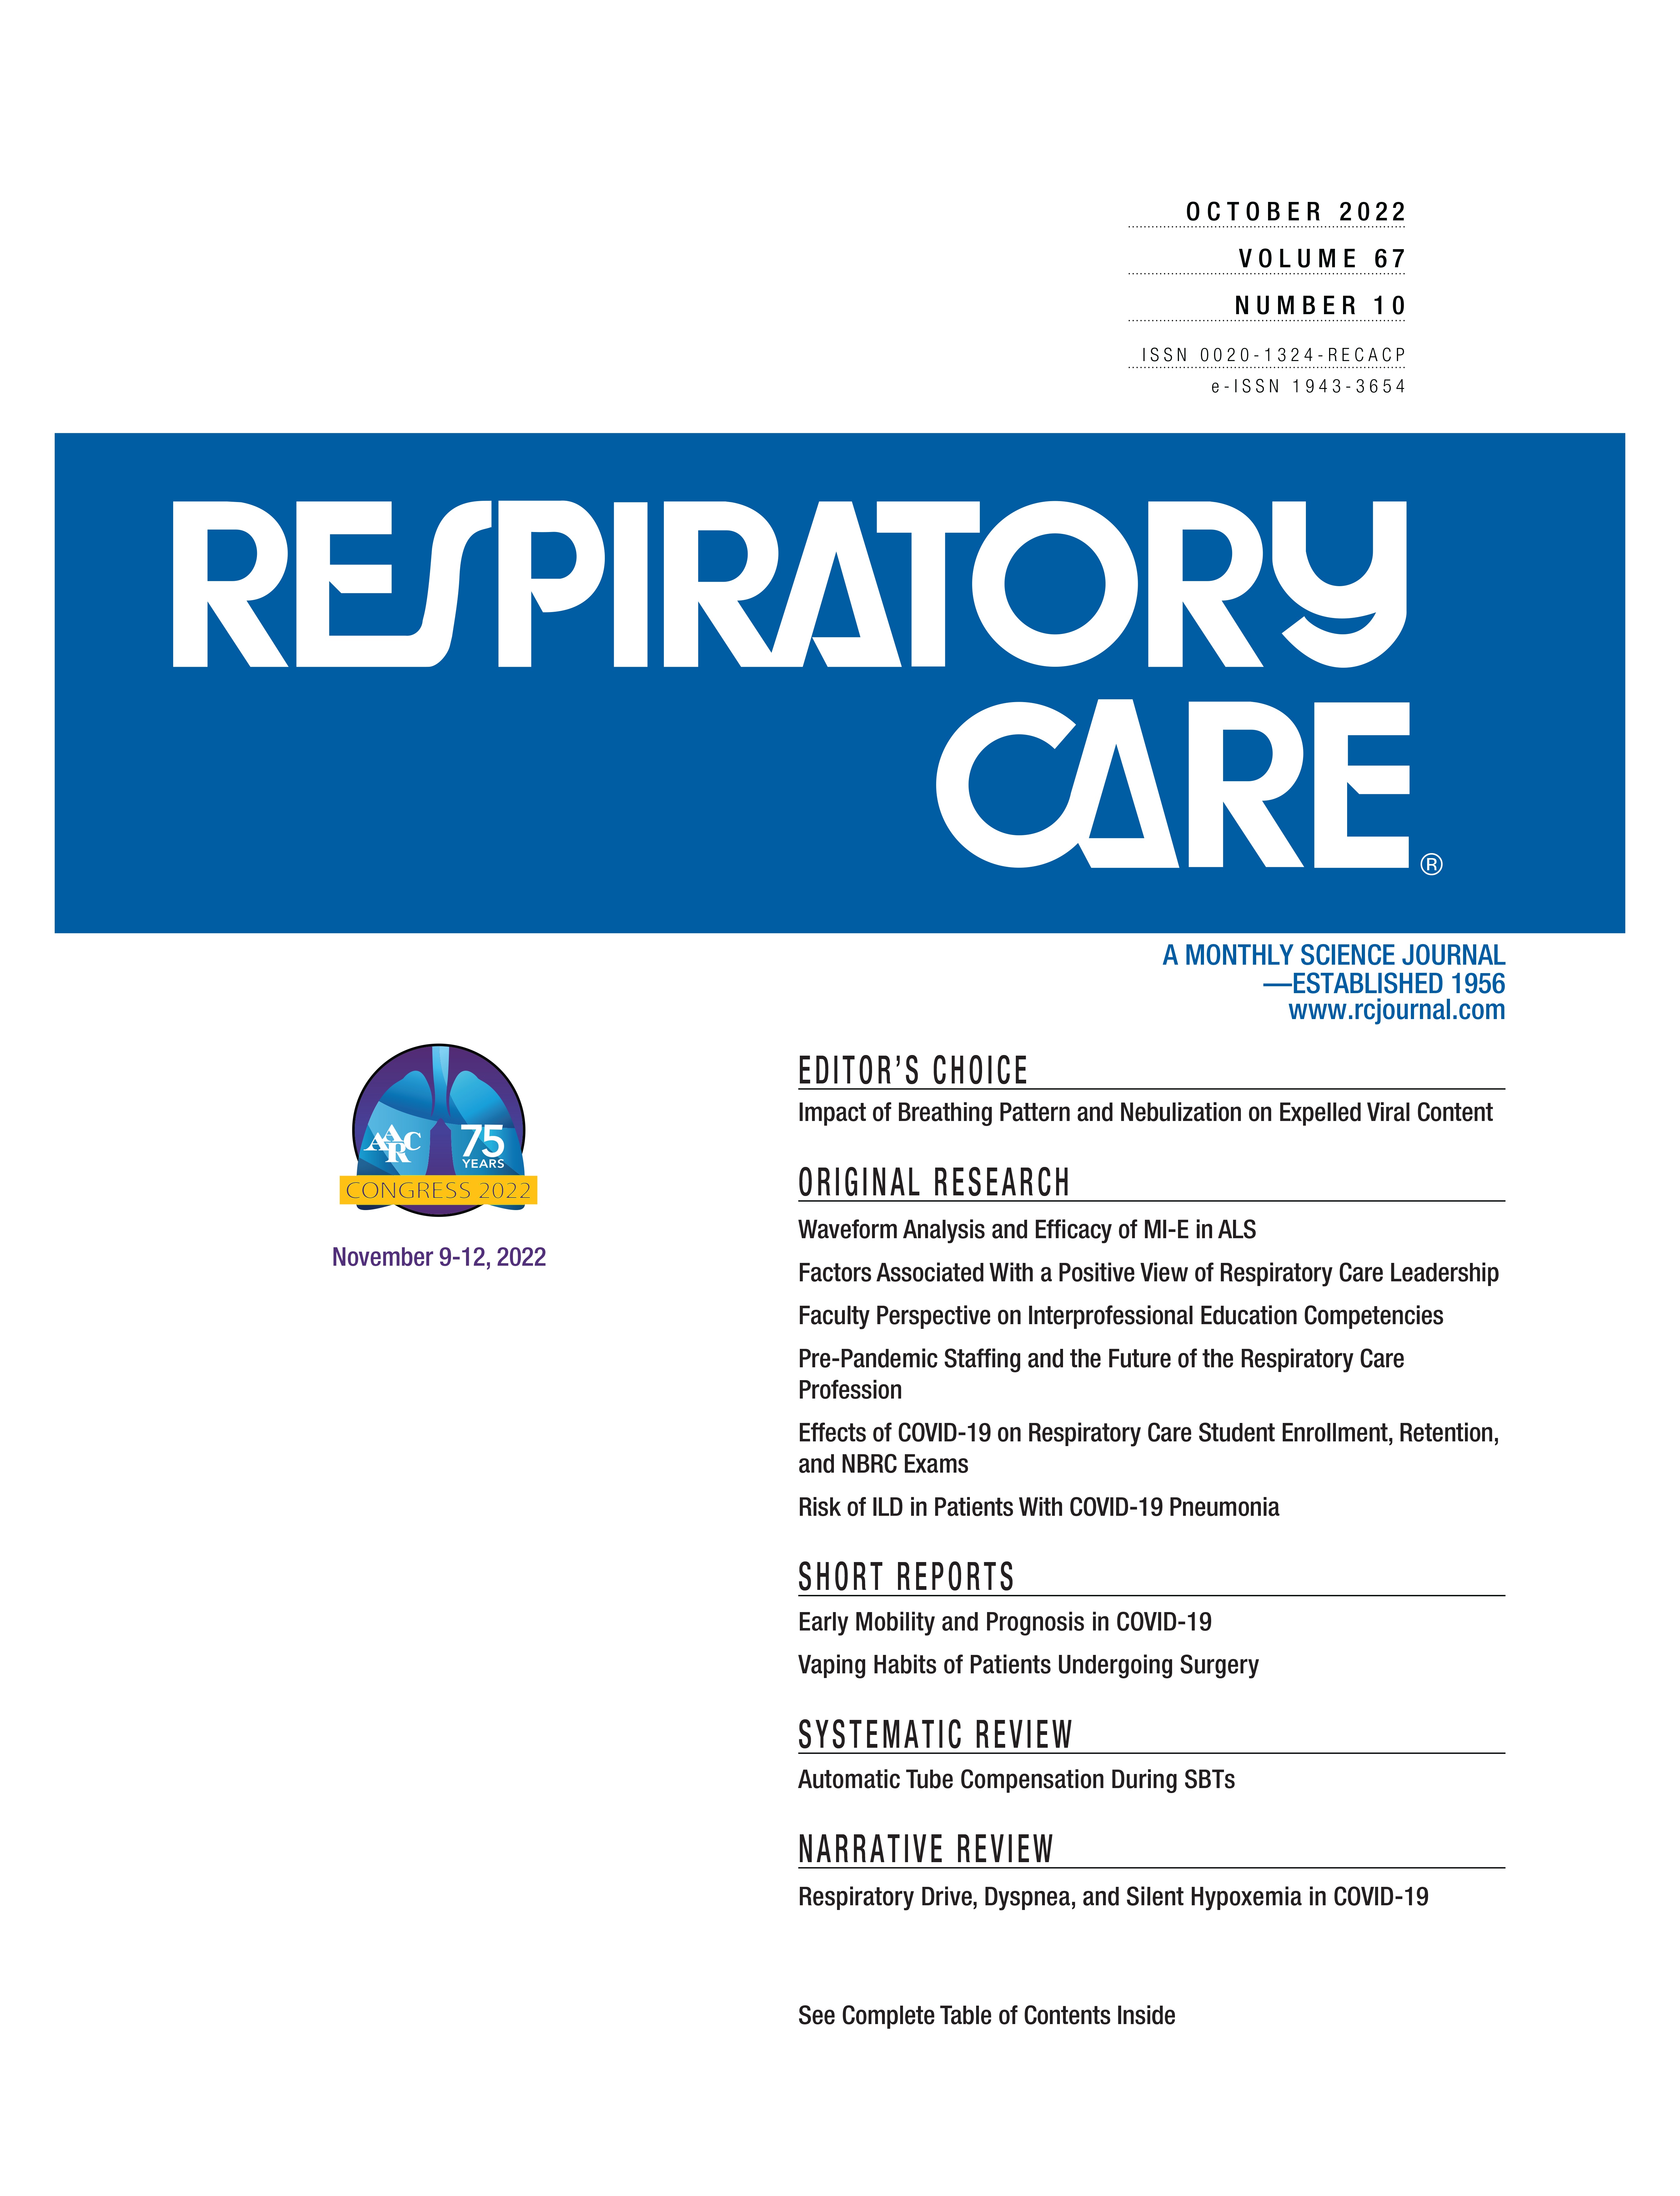 Respiratory Drive, Dyspnea, and Silent Hypoxemia: A Physiological Review in the Context of COVID-19